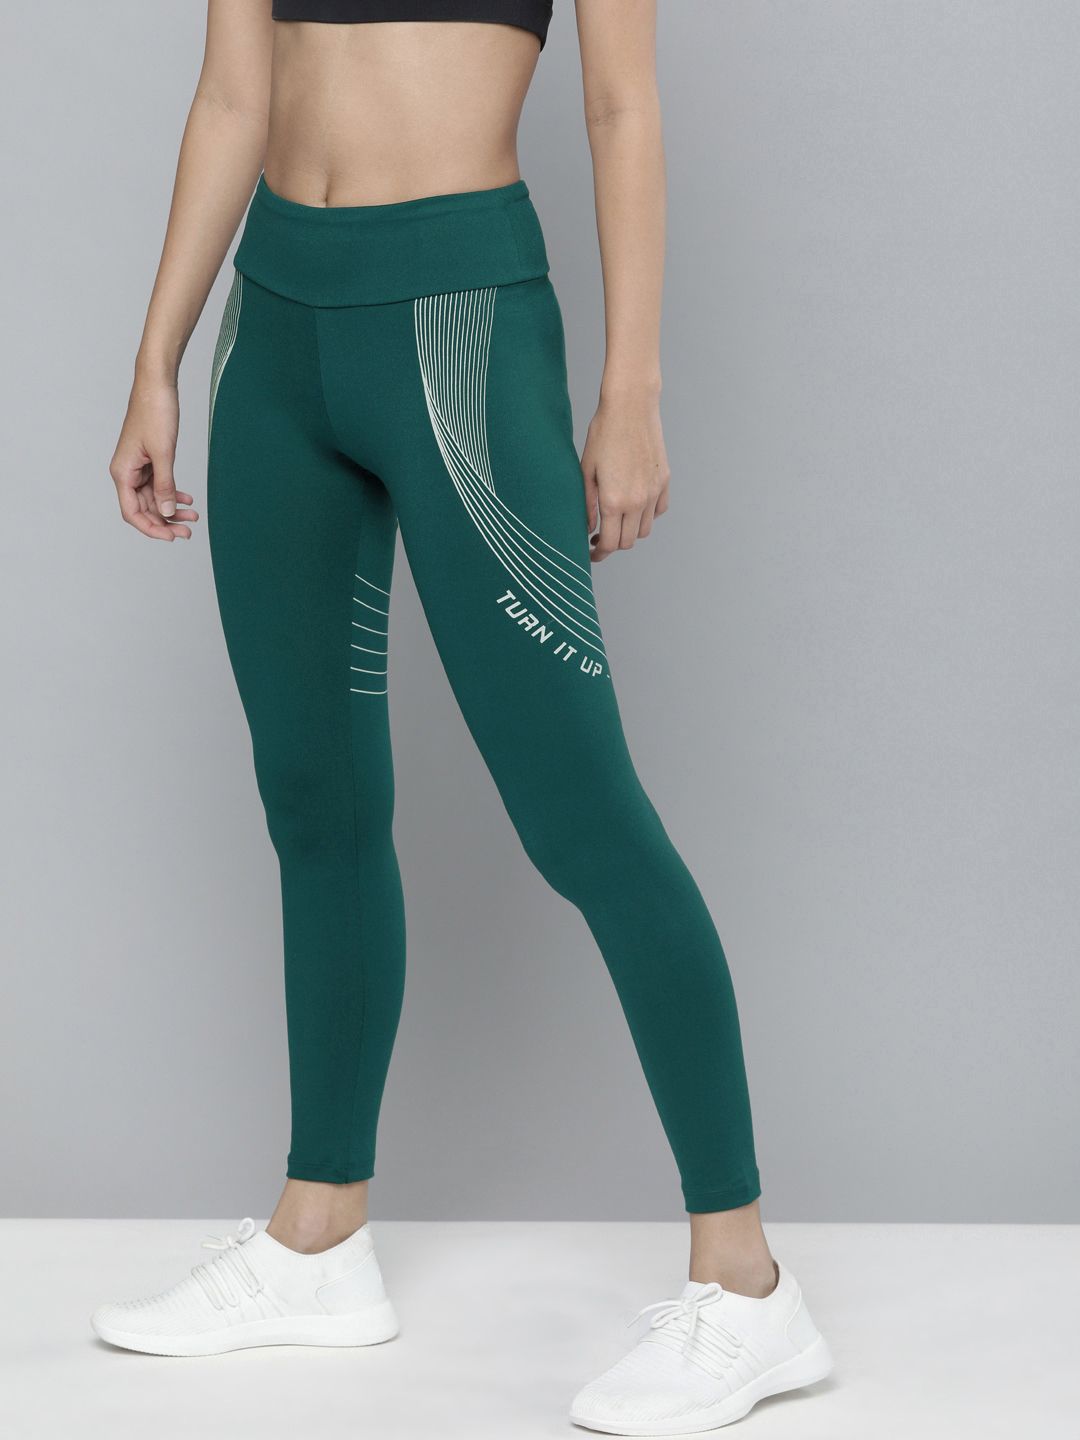 HRX by Hrithik Roshan Women Teal Green Printed Running Tights Price in India